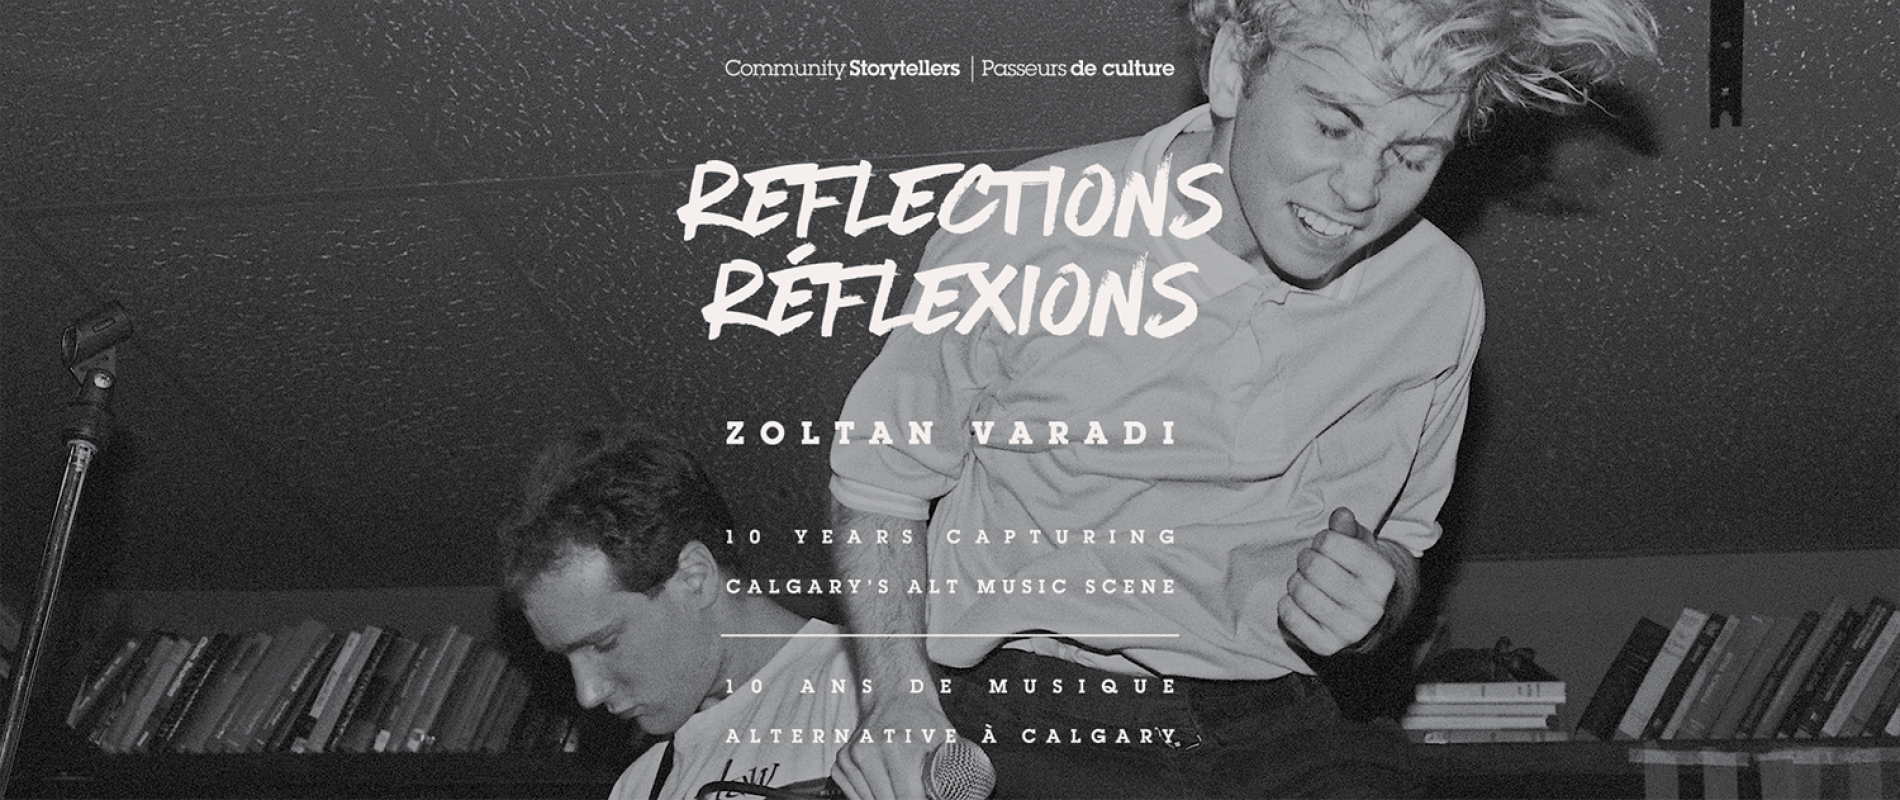 National Music Centre launches Reflections: 10 Years Capturing Calgary’s Alt Music Scene on September 18